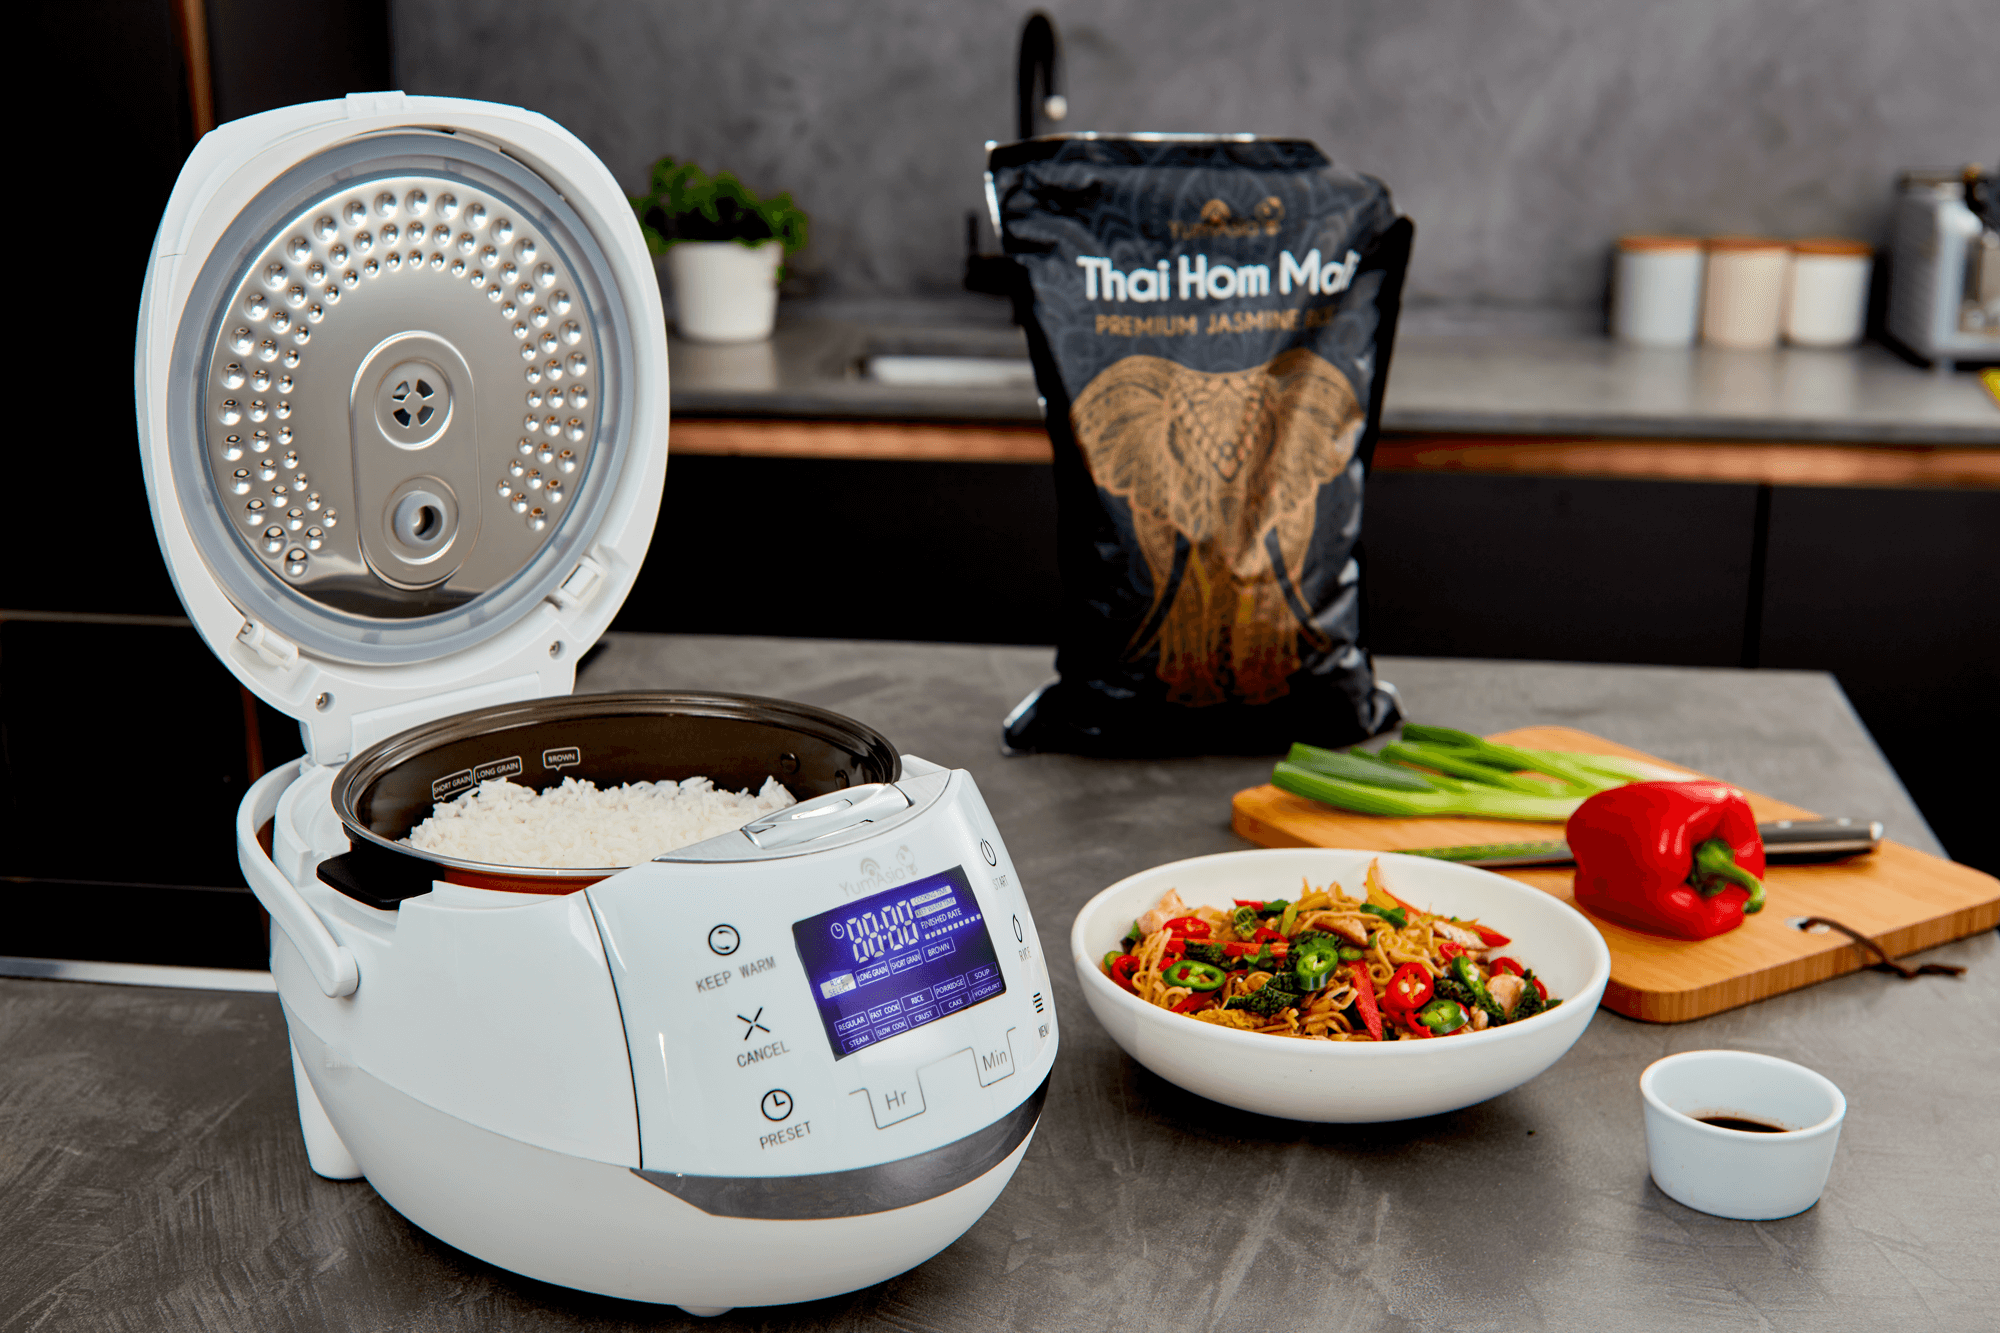 Rice Cooker Capacity Guide - Yum Asia USA – No.1 For Premium Rice Cookers